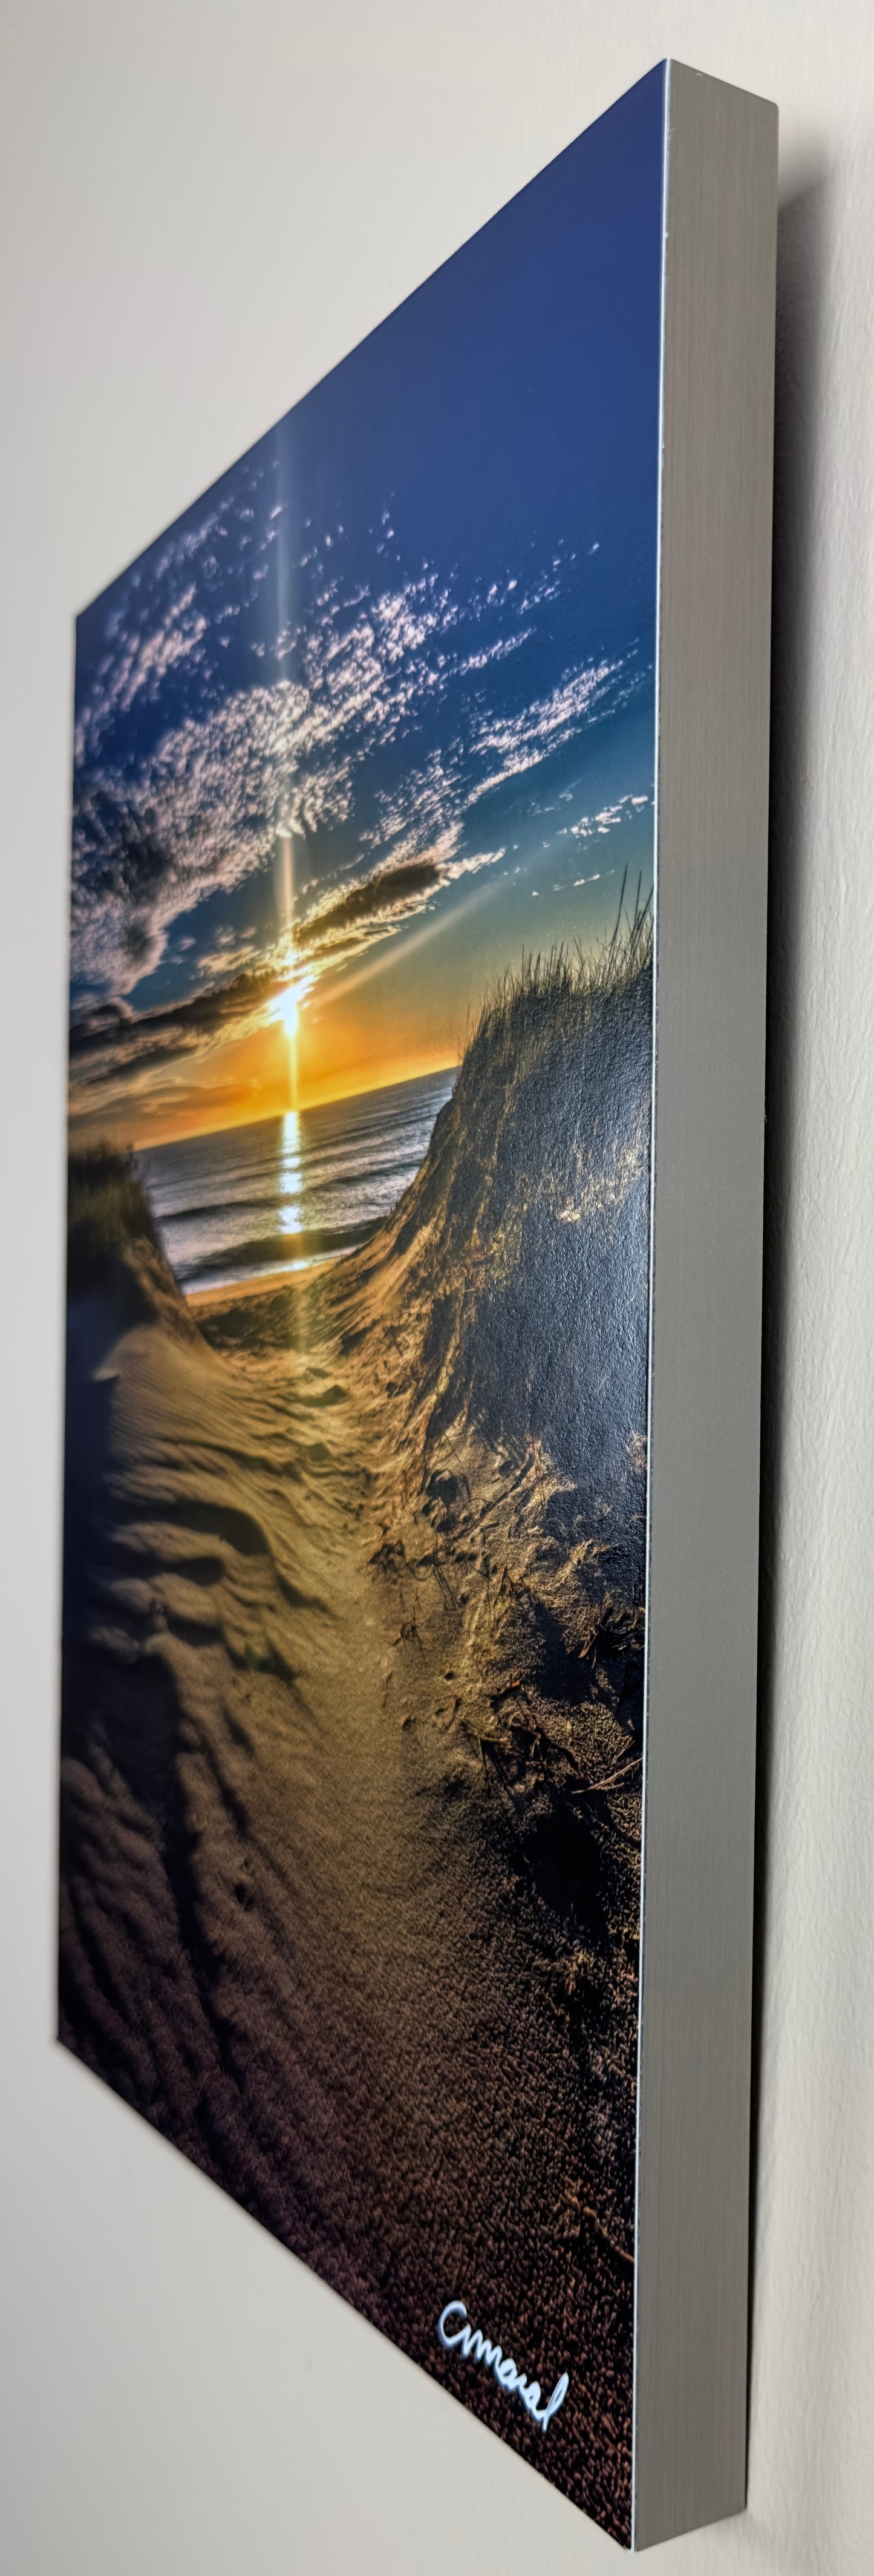 Exhibit Piece - 11x14  Coast Guard Beach Eastham, Cape Cod - Standout with stainless steel edge